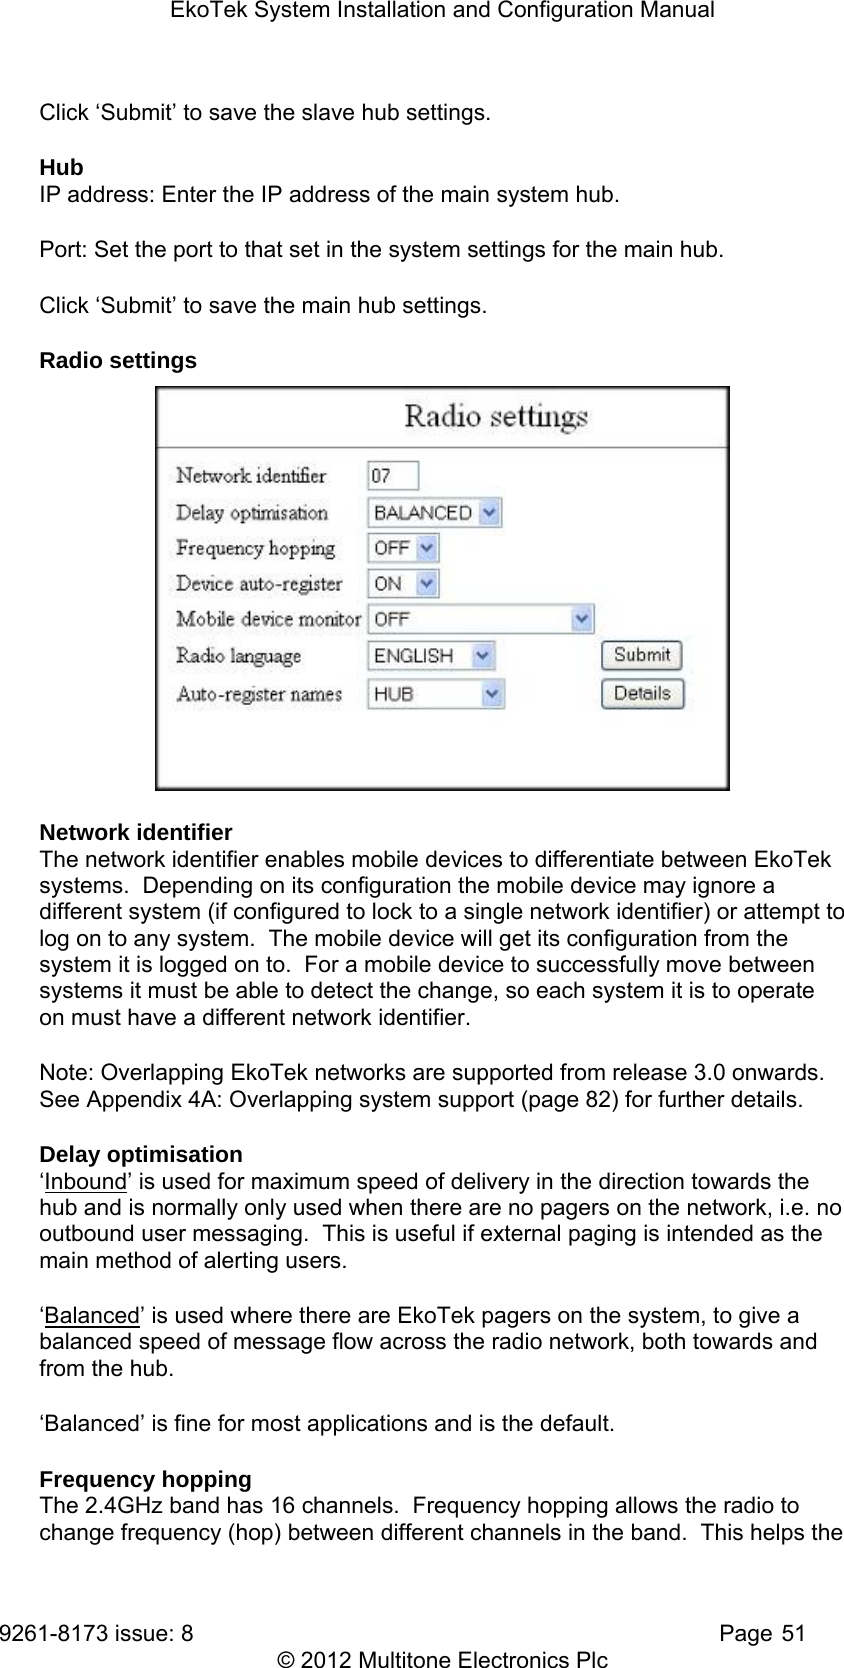 EkoTek System Installation and Configuration Manual 9261-8173 issue: 8   Page 51 © 2012 Multitone Electronics Plc Click ‘Submit’ to save the slave hub settings. Hub IP address: Enter the IP address of the main system hub. Port: Set the port to that set in the system settings for the main hub. Click ‘Submit’ to save the main hub settings. Radio settings  Network identifier The network identifier enables mobile devices to differentiate between EkoTek systems.  Depending on its configuration the mobile device may ignore a different system (if configured to lock to a single network identifier) or attempt to log on to any system.  The mobile device will get its configuration from the system it is logged on to.  For a mobile device to successfully move between systems it must be able to detect the change, so each system it is to operate on must have a different network identifier. Note: Overlapping EkoTek networks are supported from release 3.0 onwards.  See Appendix 4A: Overlapping system support (page 82) for further details. Delay optimisation ‘Inbound’ is used for maximum speed of delivery in the direction towards the hub and is normally only used when there are no pagers on the network, i.e. no outbound user messaging.  This is useful if external paging is intended as the main method of alerting users. ‘Balanced’ is used where there are EkoTek pagers on the system, to give a balanced speed of message flow across the radio network, both towards and from the hub. ‘Balanced’ is fine for most applications and is the default. Frequency hopping The 2.4GHz band has 16 channels.  Frequency hopping allows the radio to change frequency (hop) between different channels in the band.  This helps the 